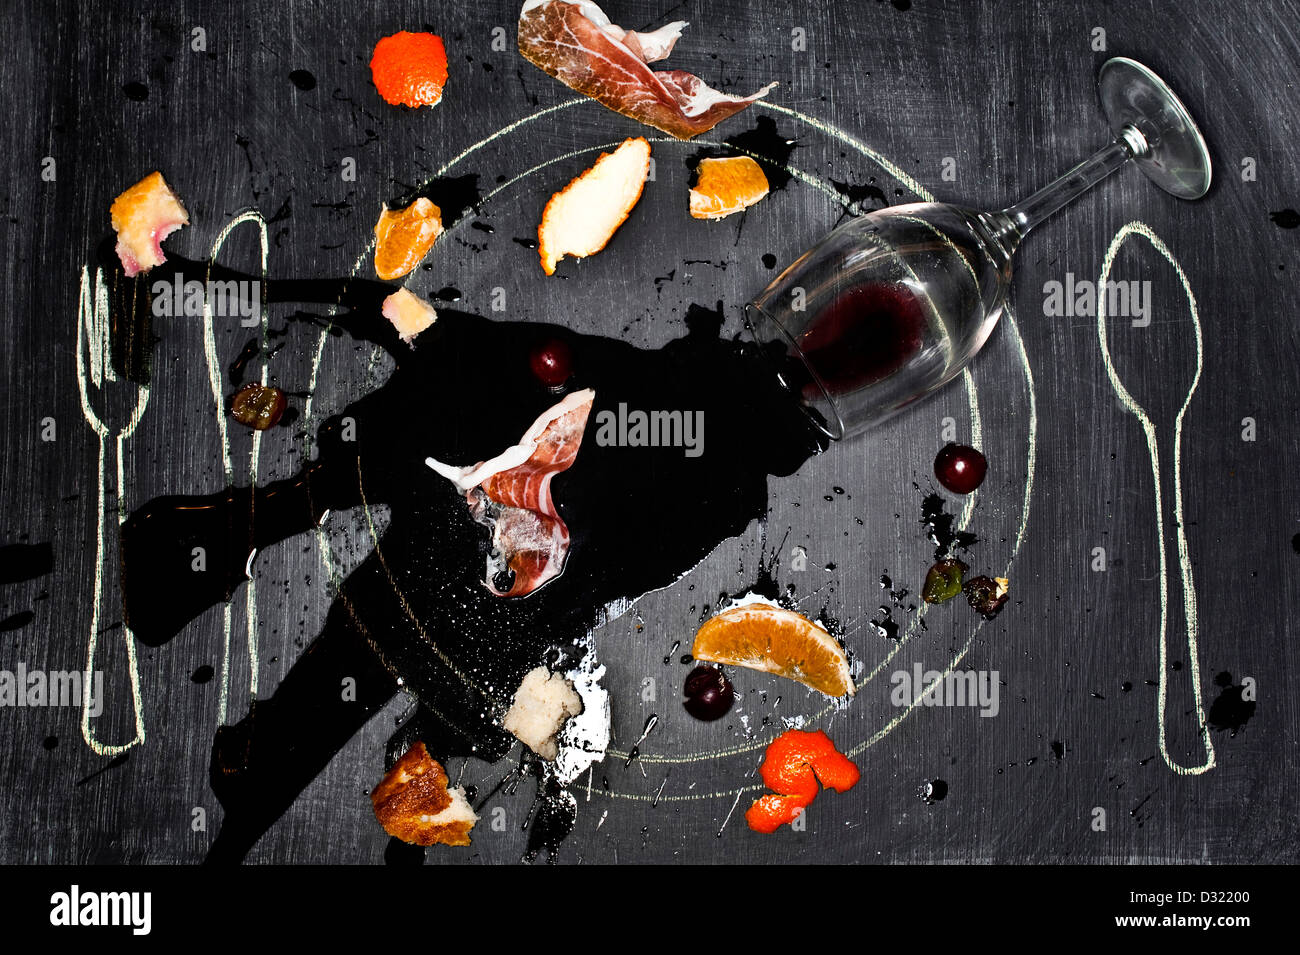 Wine glass and food spilled onto chalkboard Stock Photo